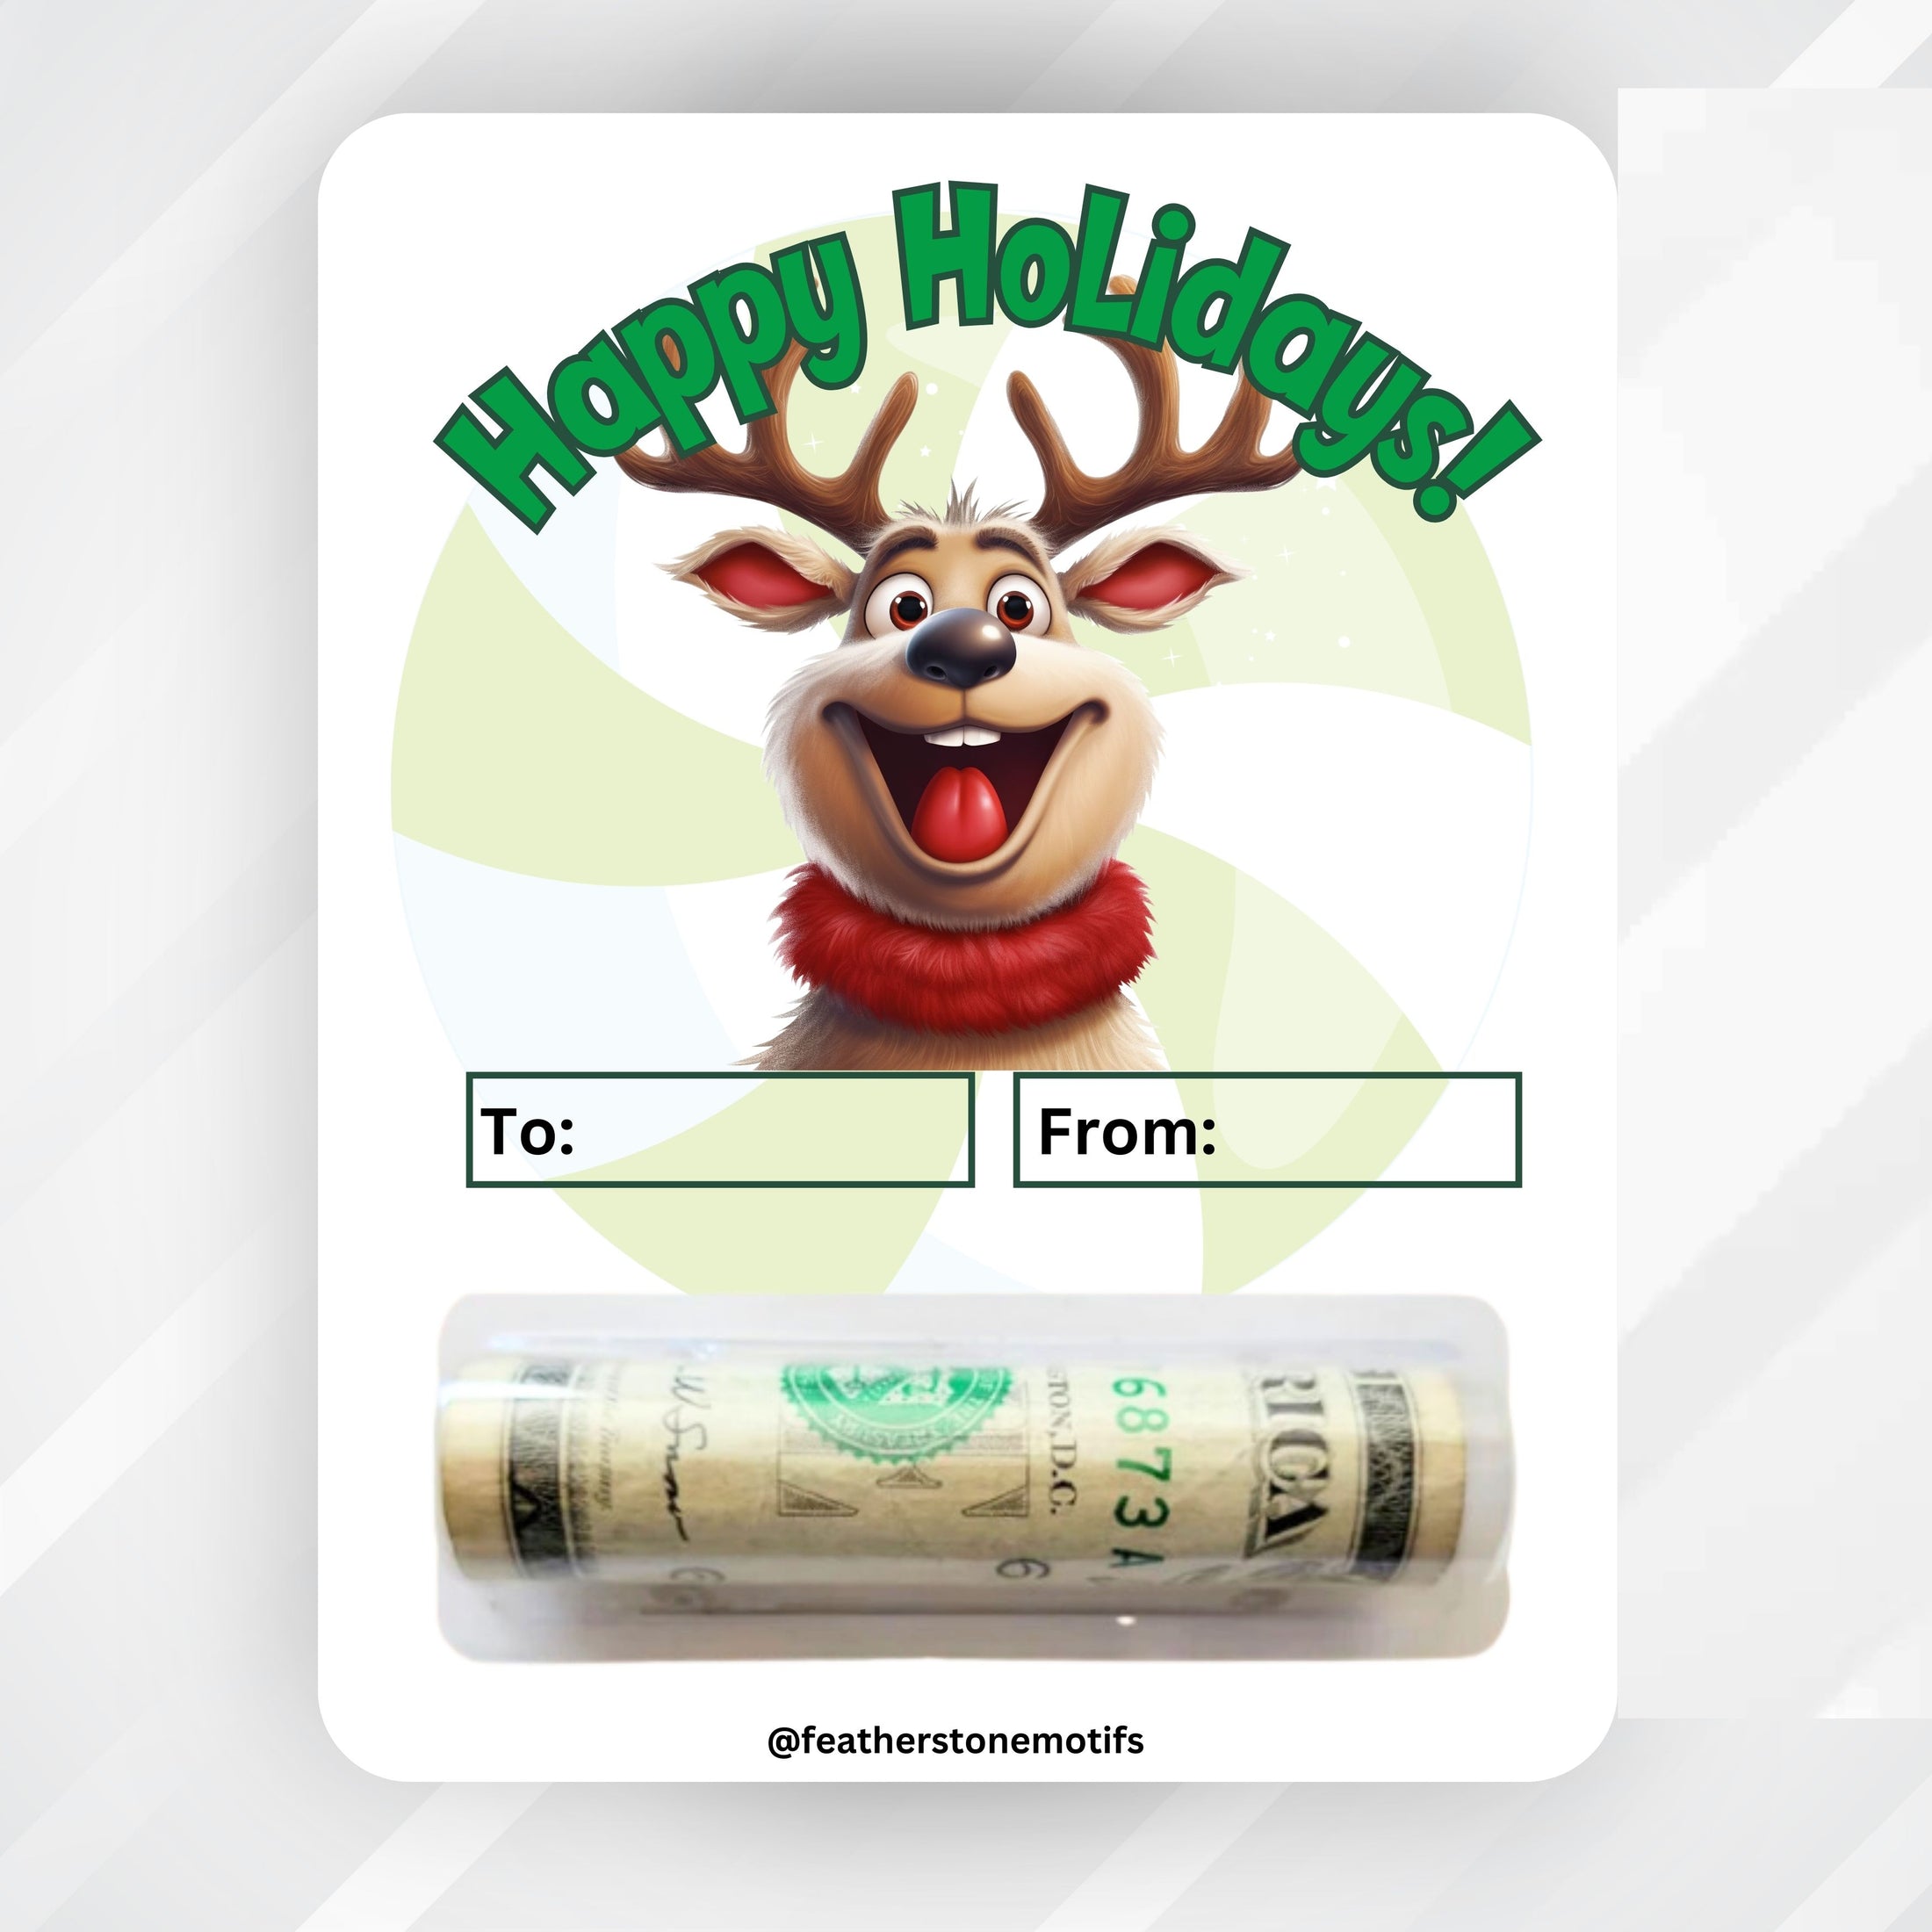 This image shows the money tube attached to the Happy Reindeer Money Card.